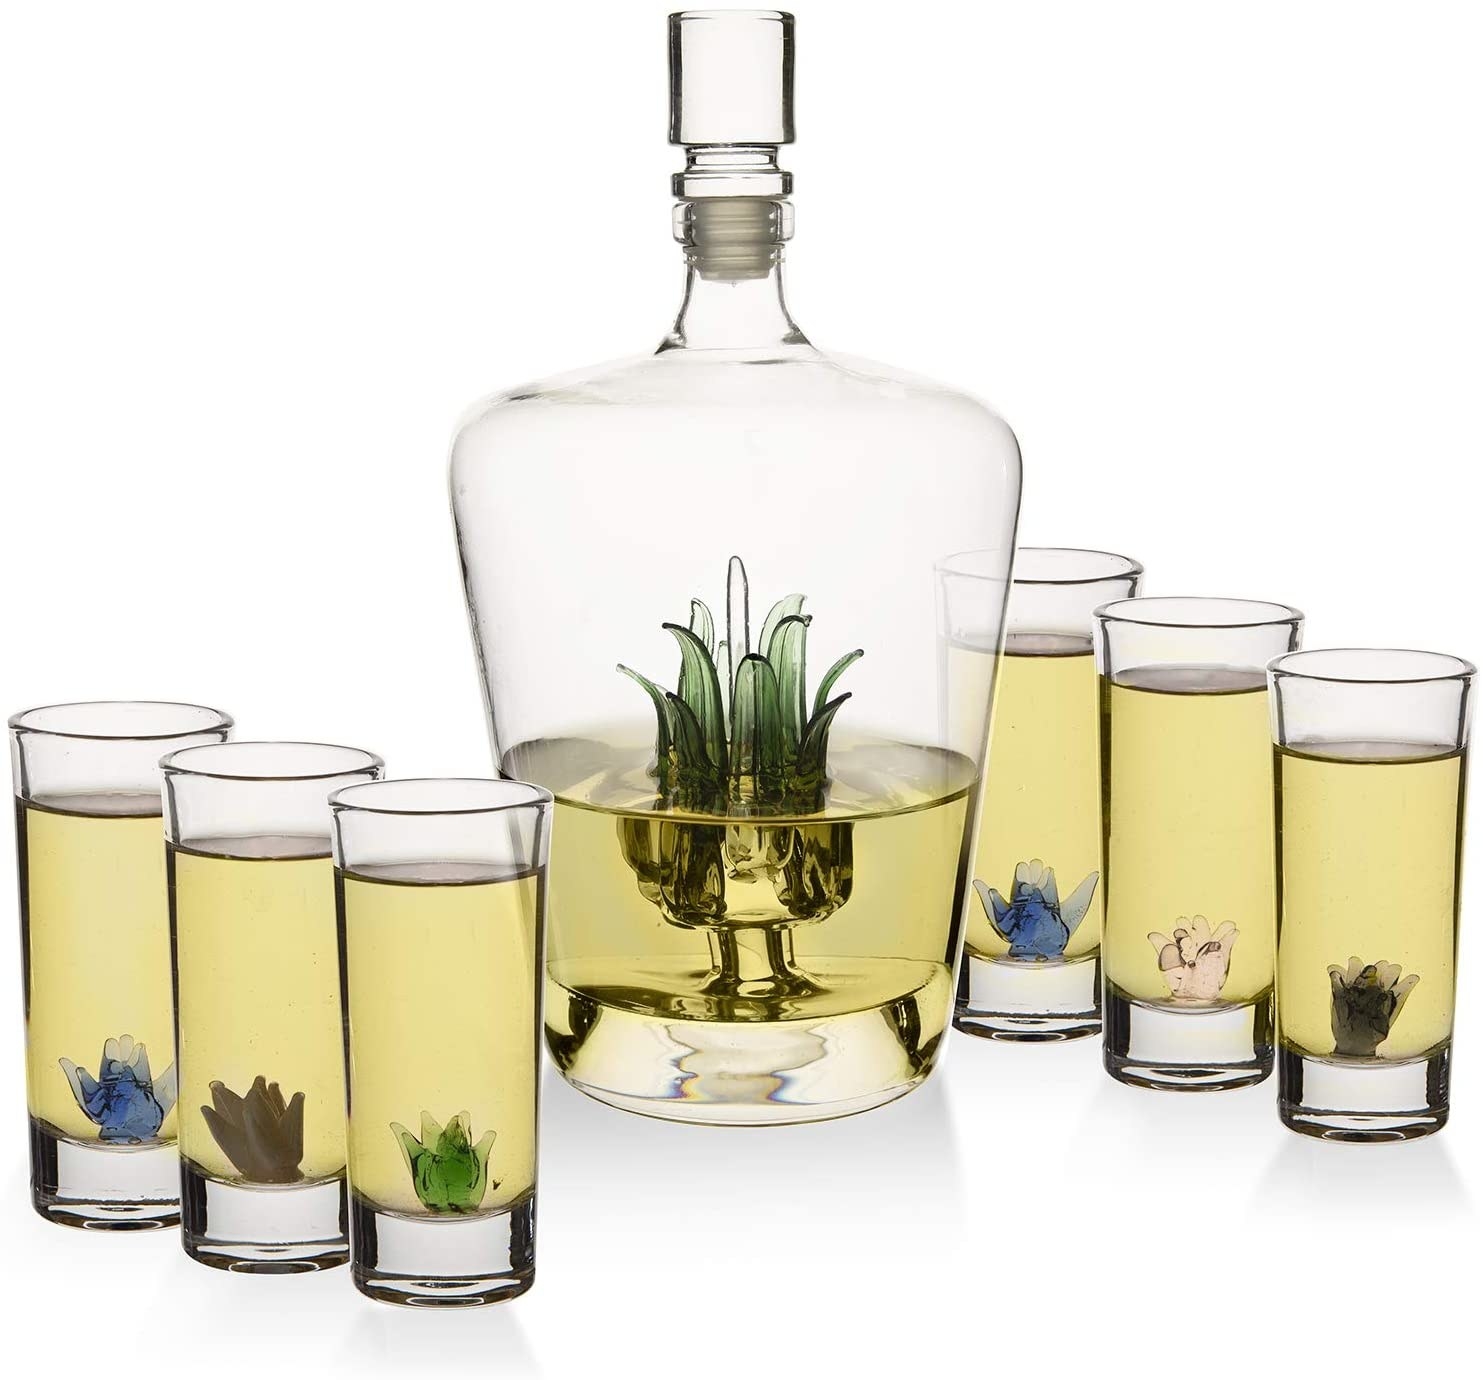 Tequila decanter and shot glass set with glass colorful agave plants inside